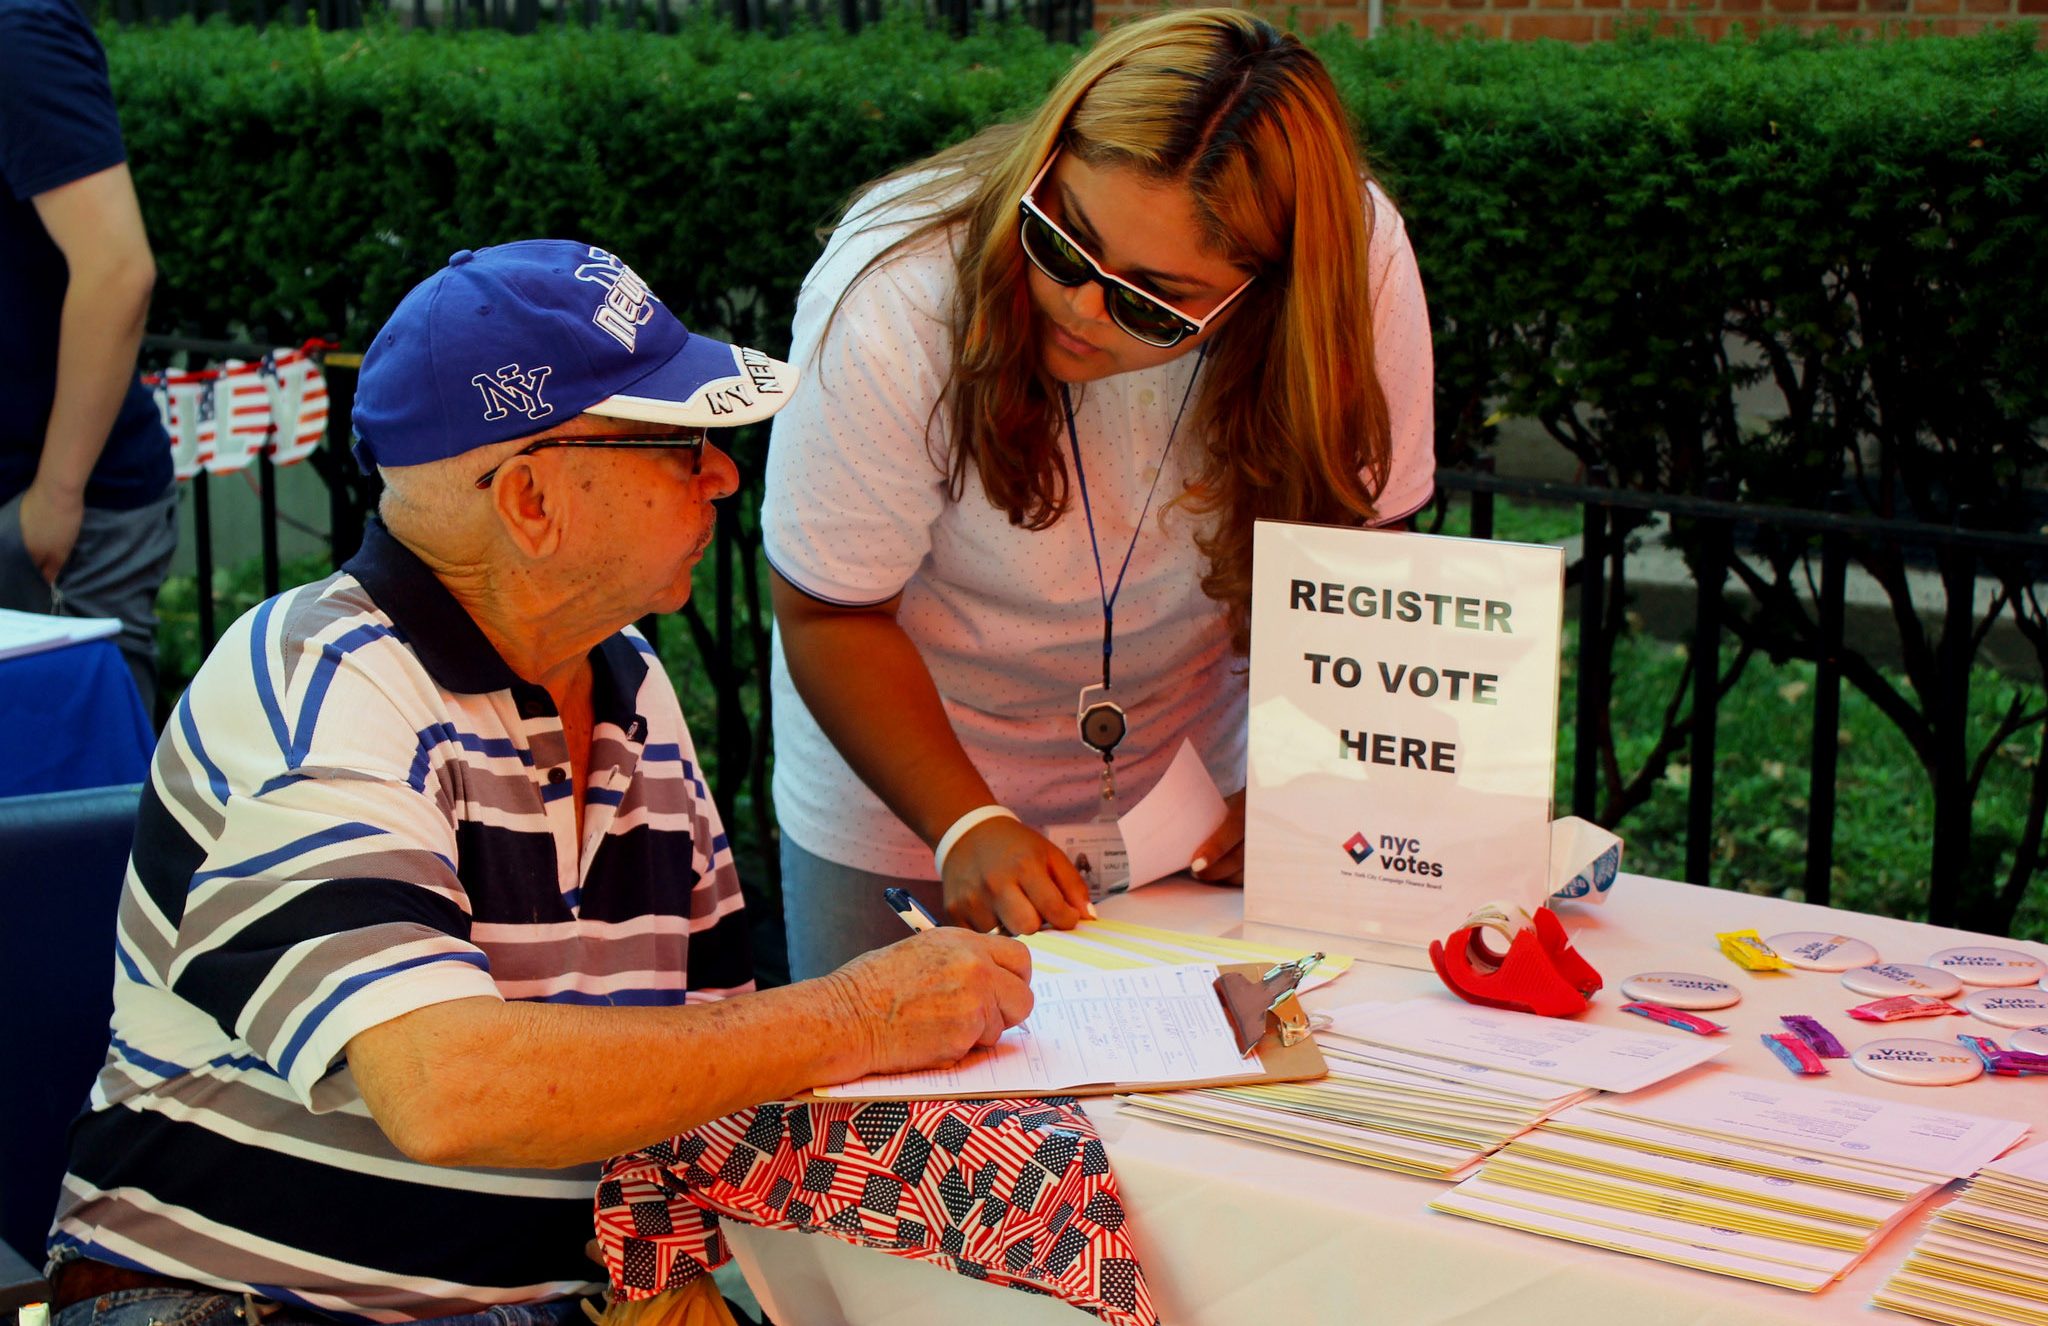 Candid photo of woman helping community member register to vote